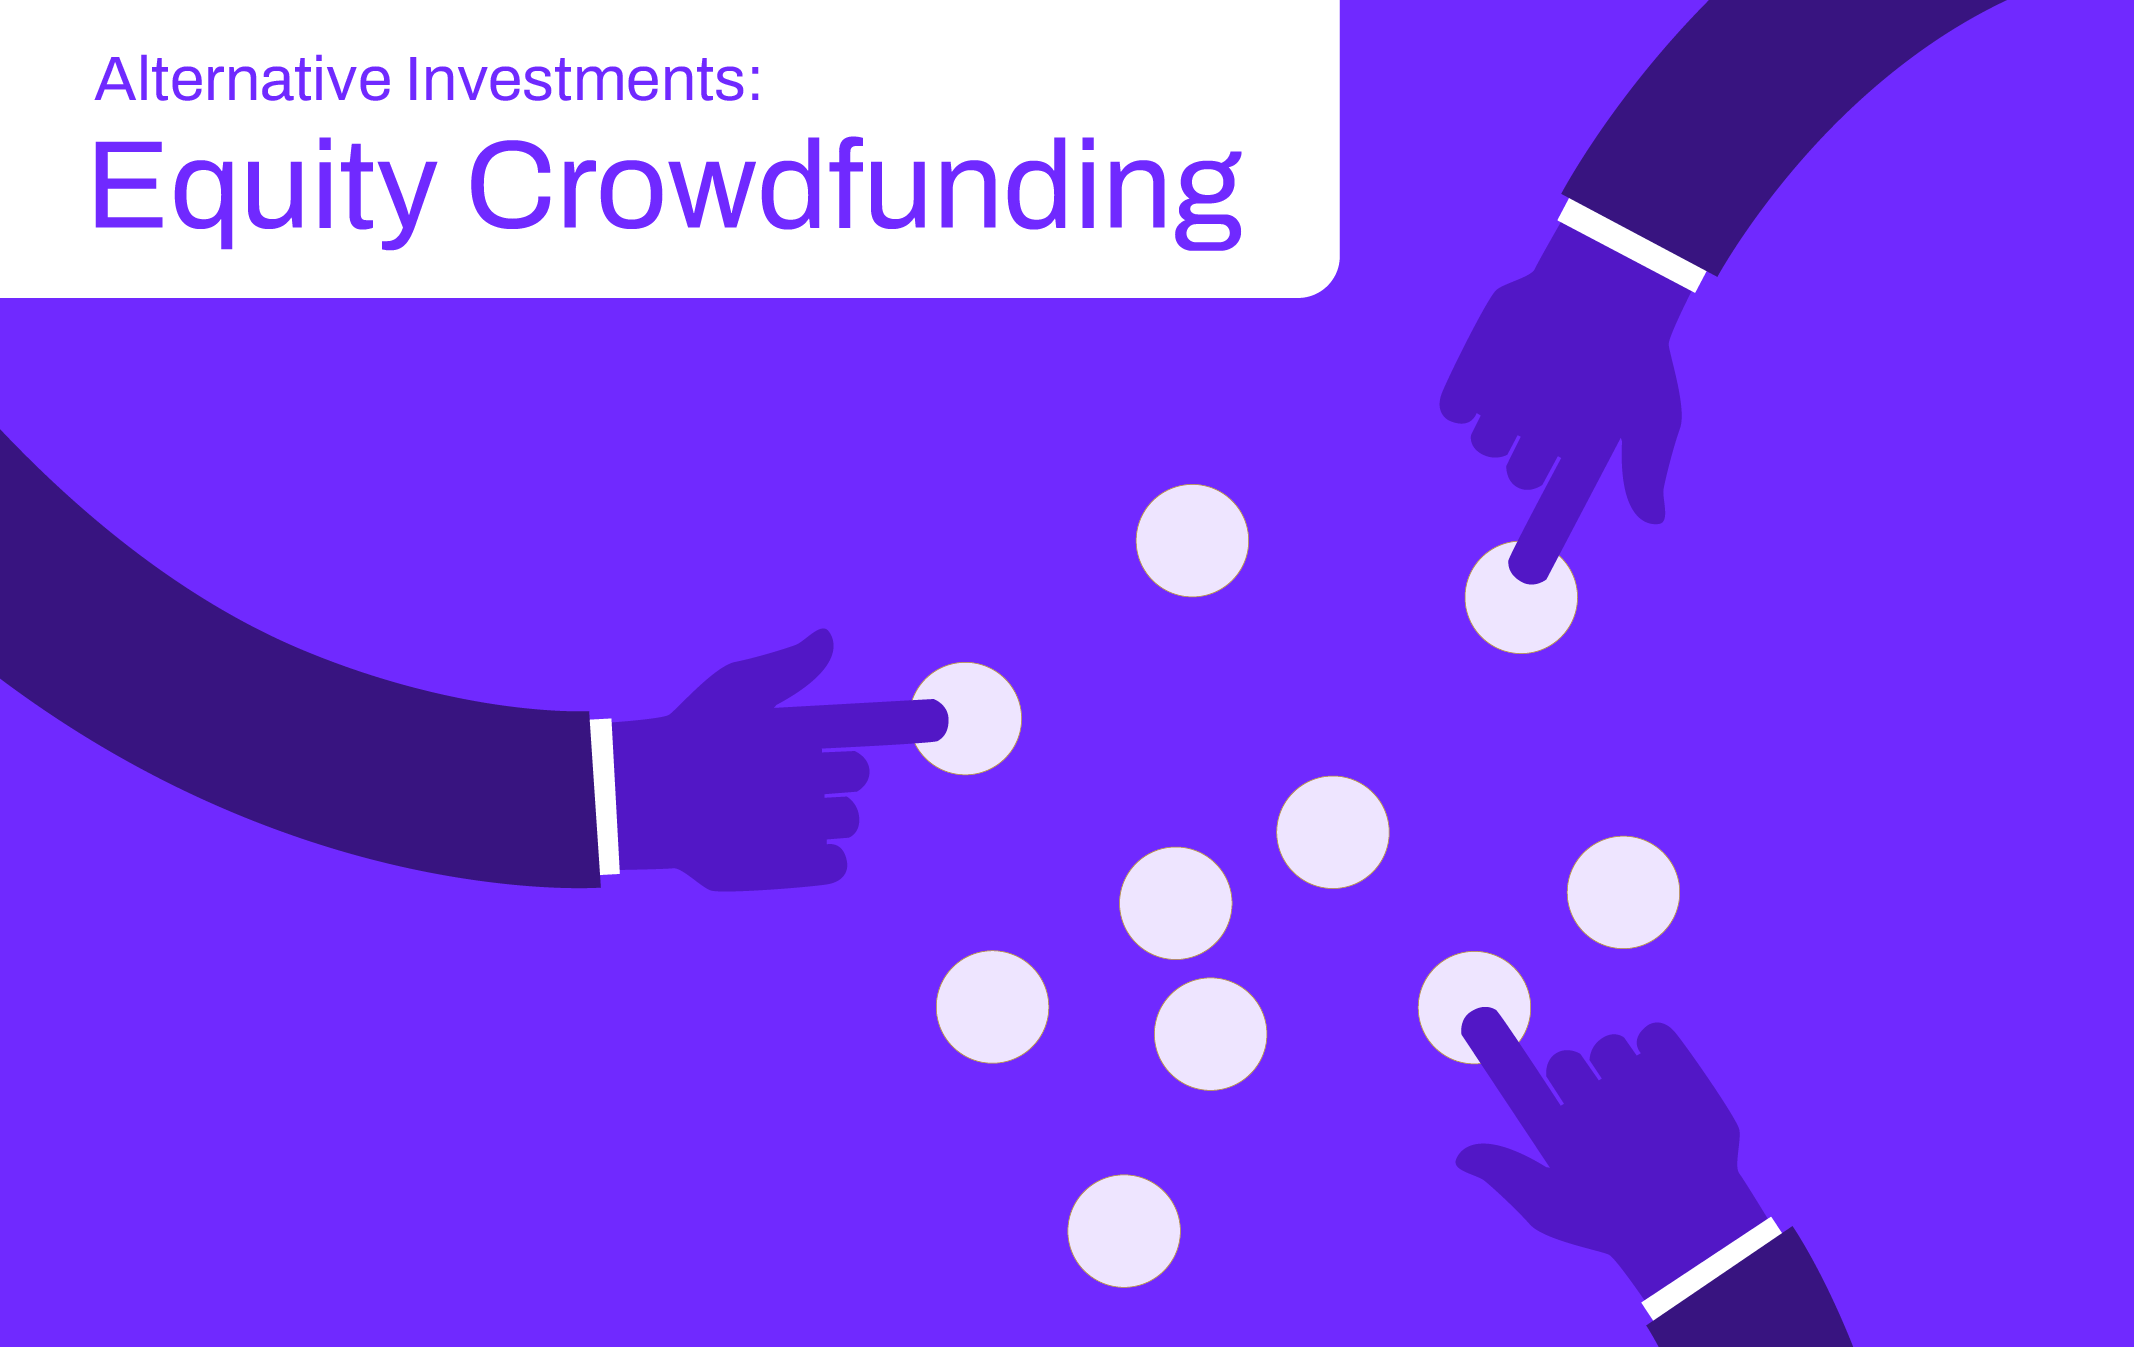 Alternative Investments: Equity Crowdfunding